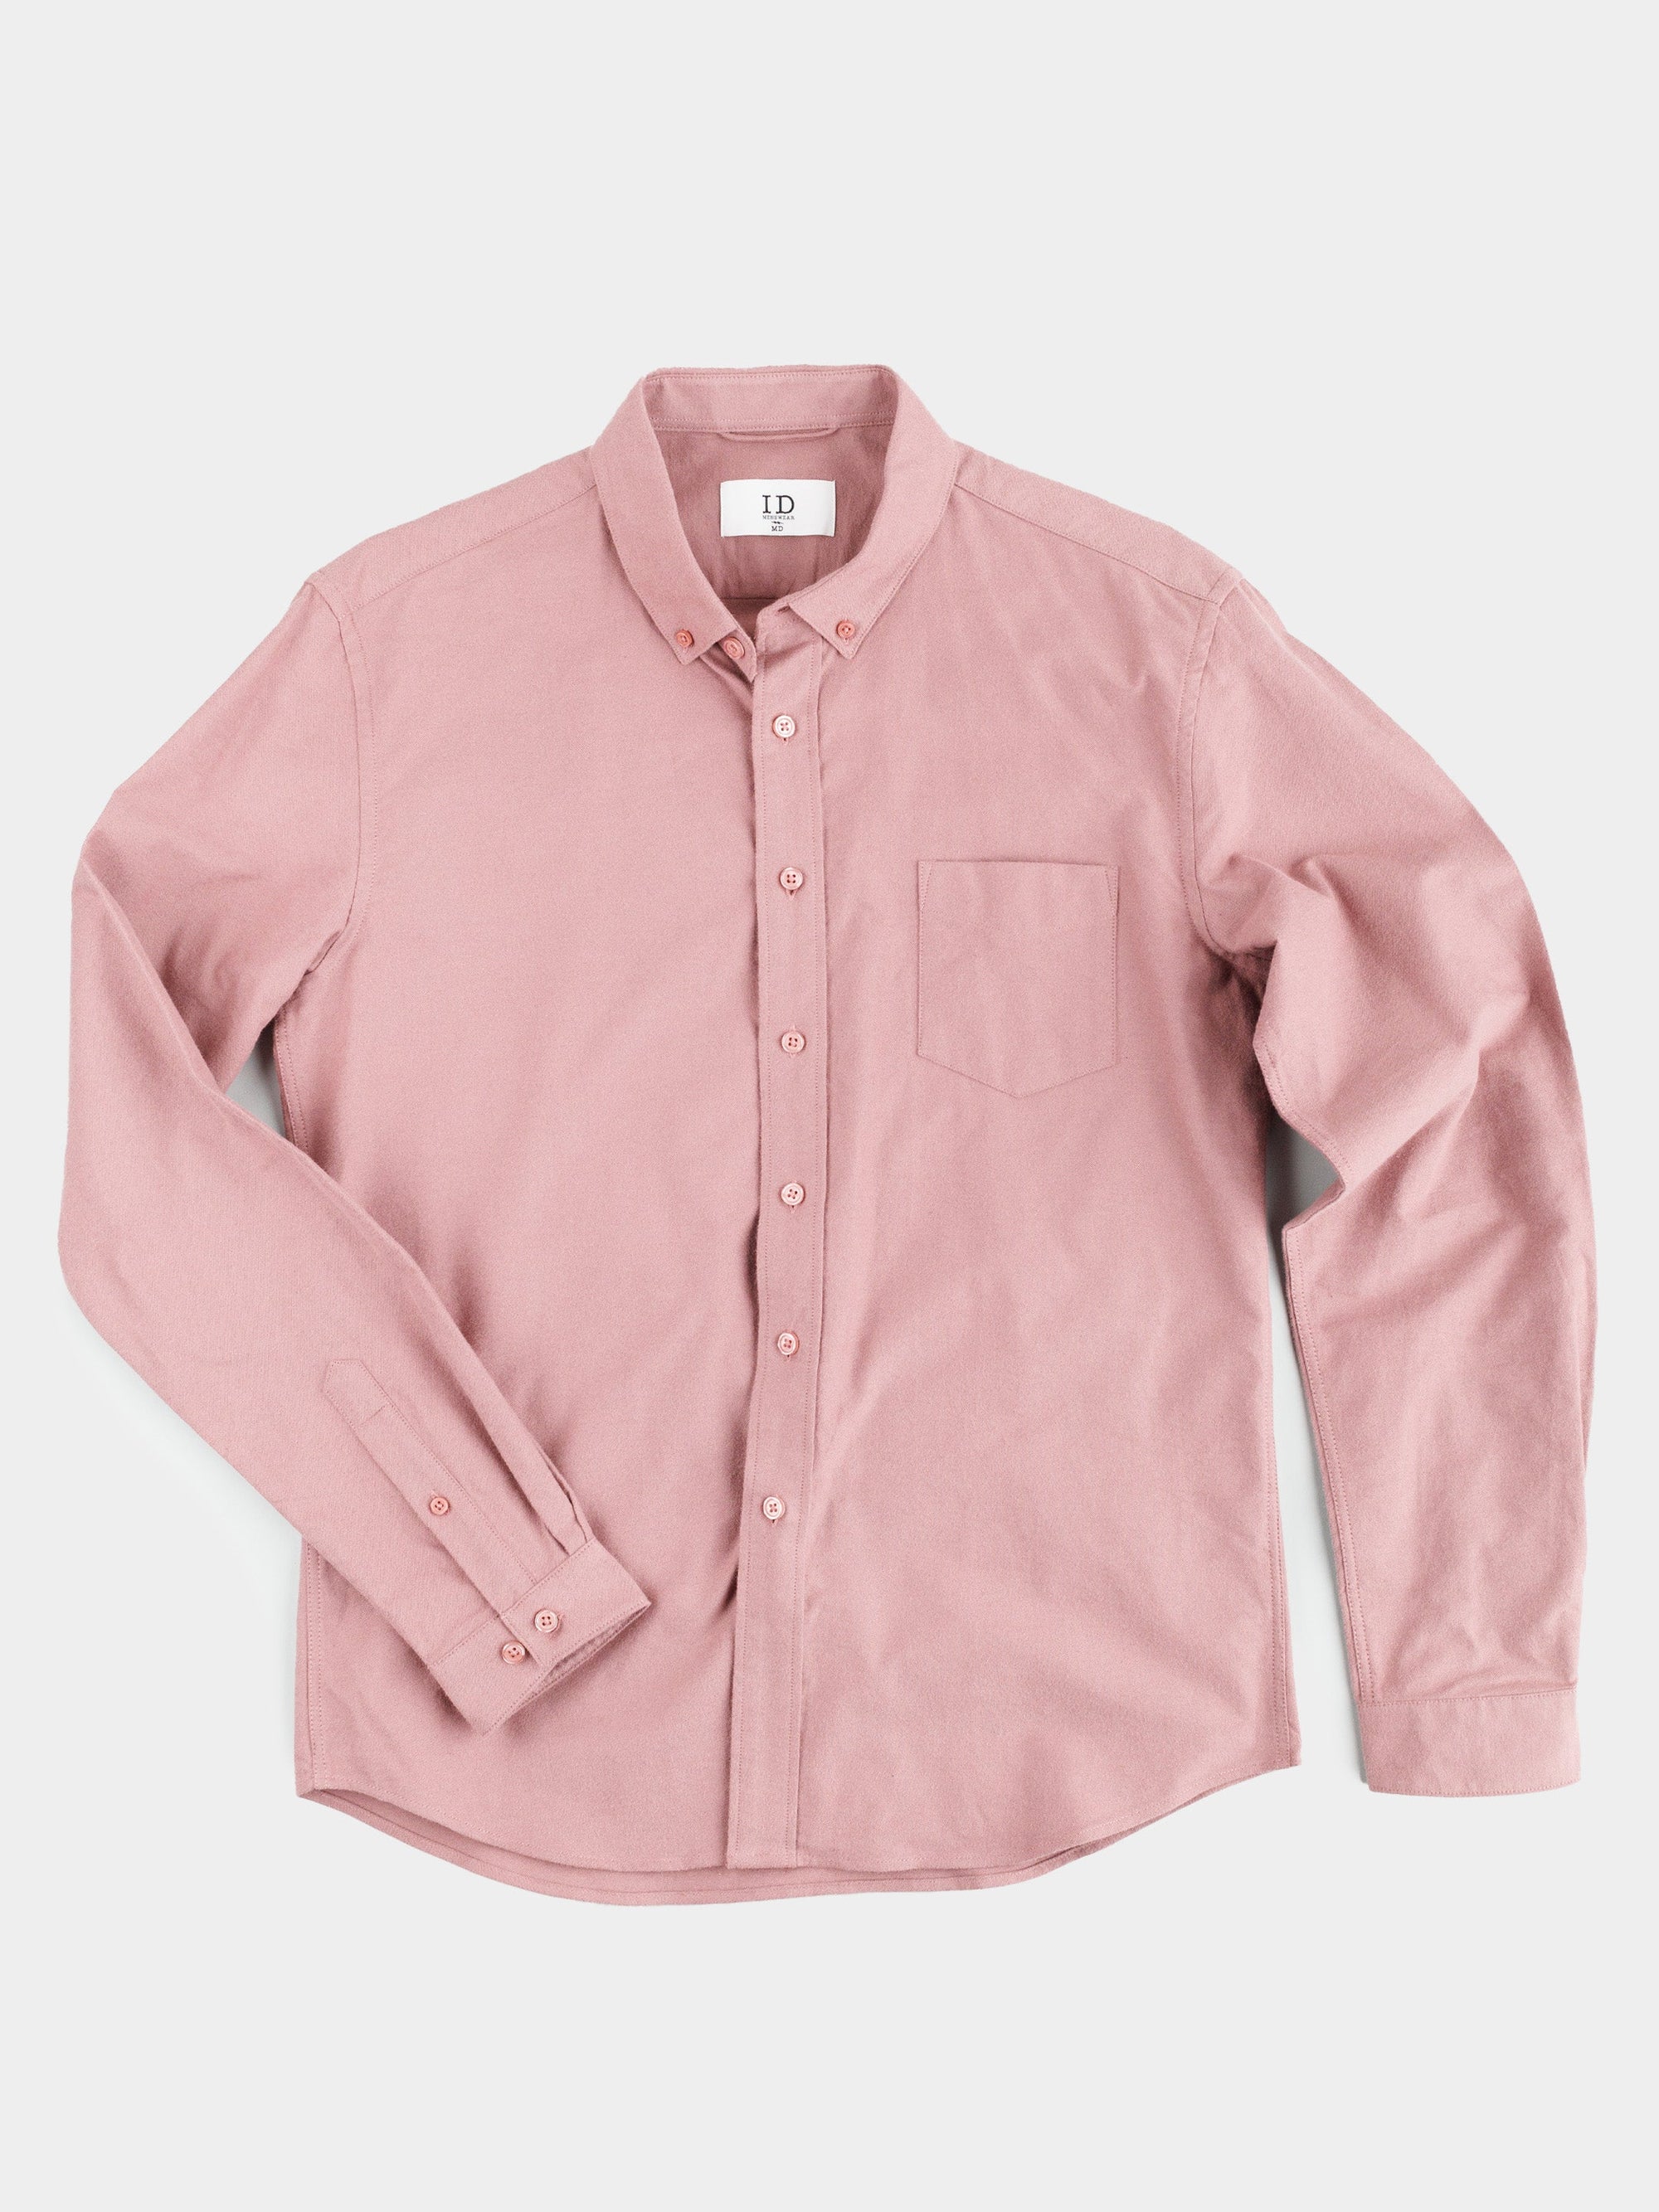 Milo Brushed Oxford Flannel Cotton Shirt